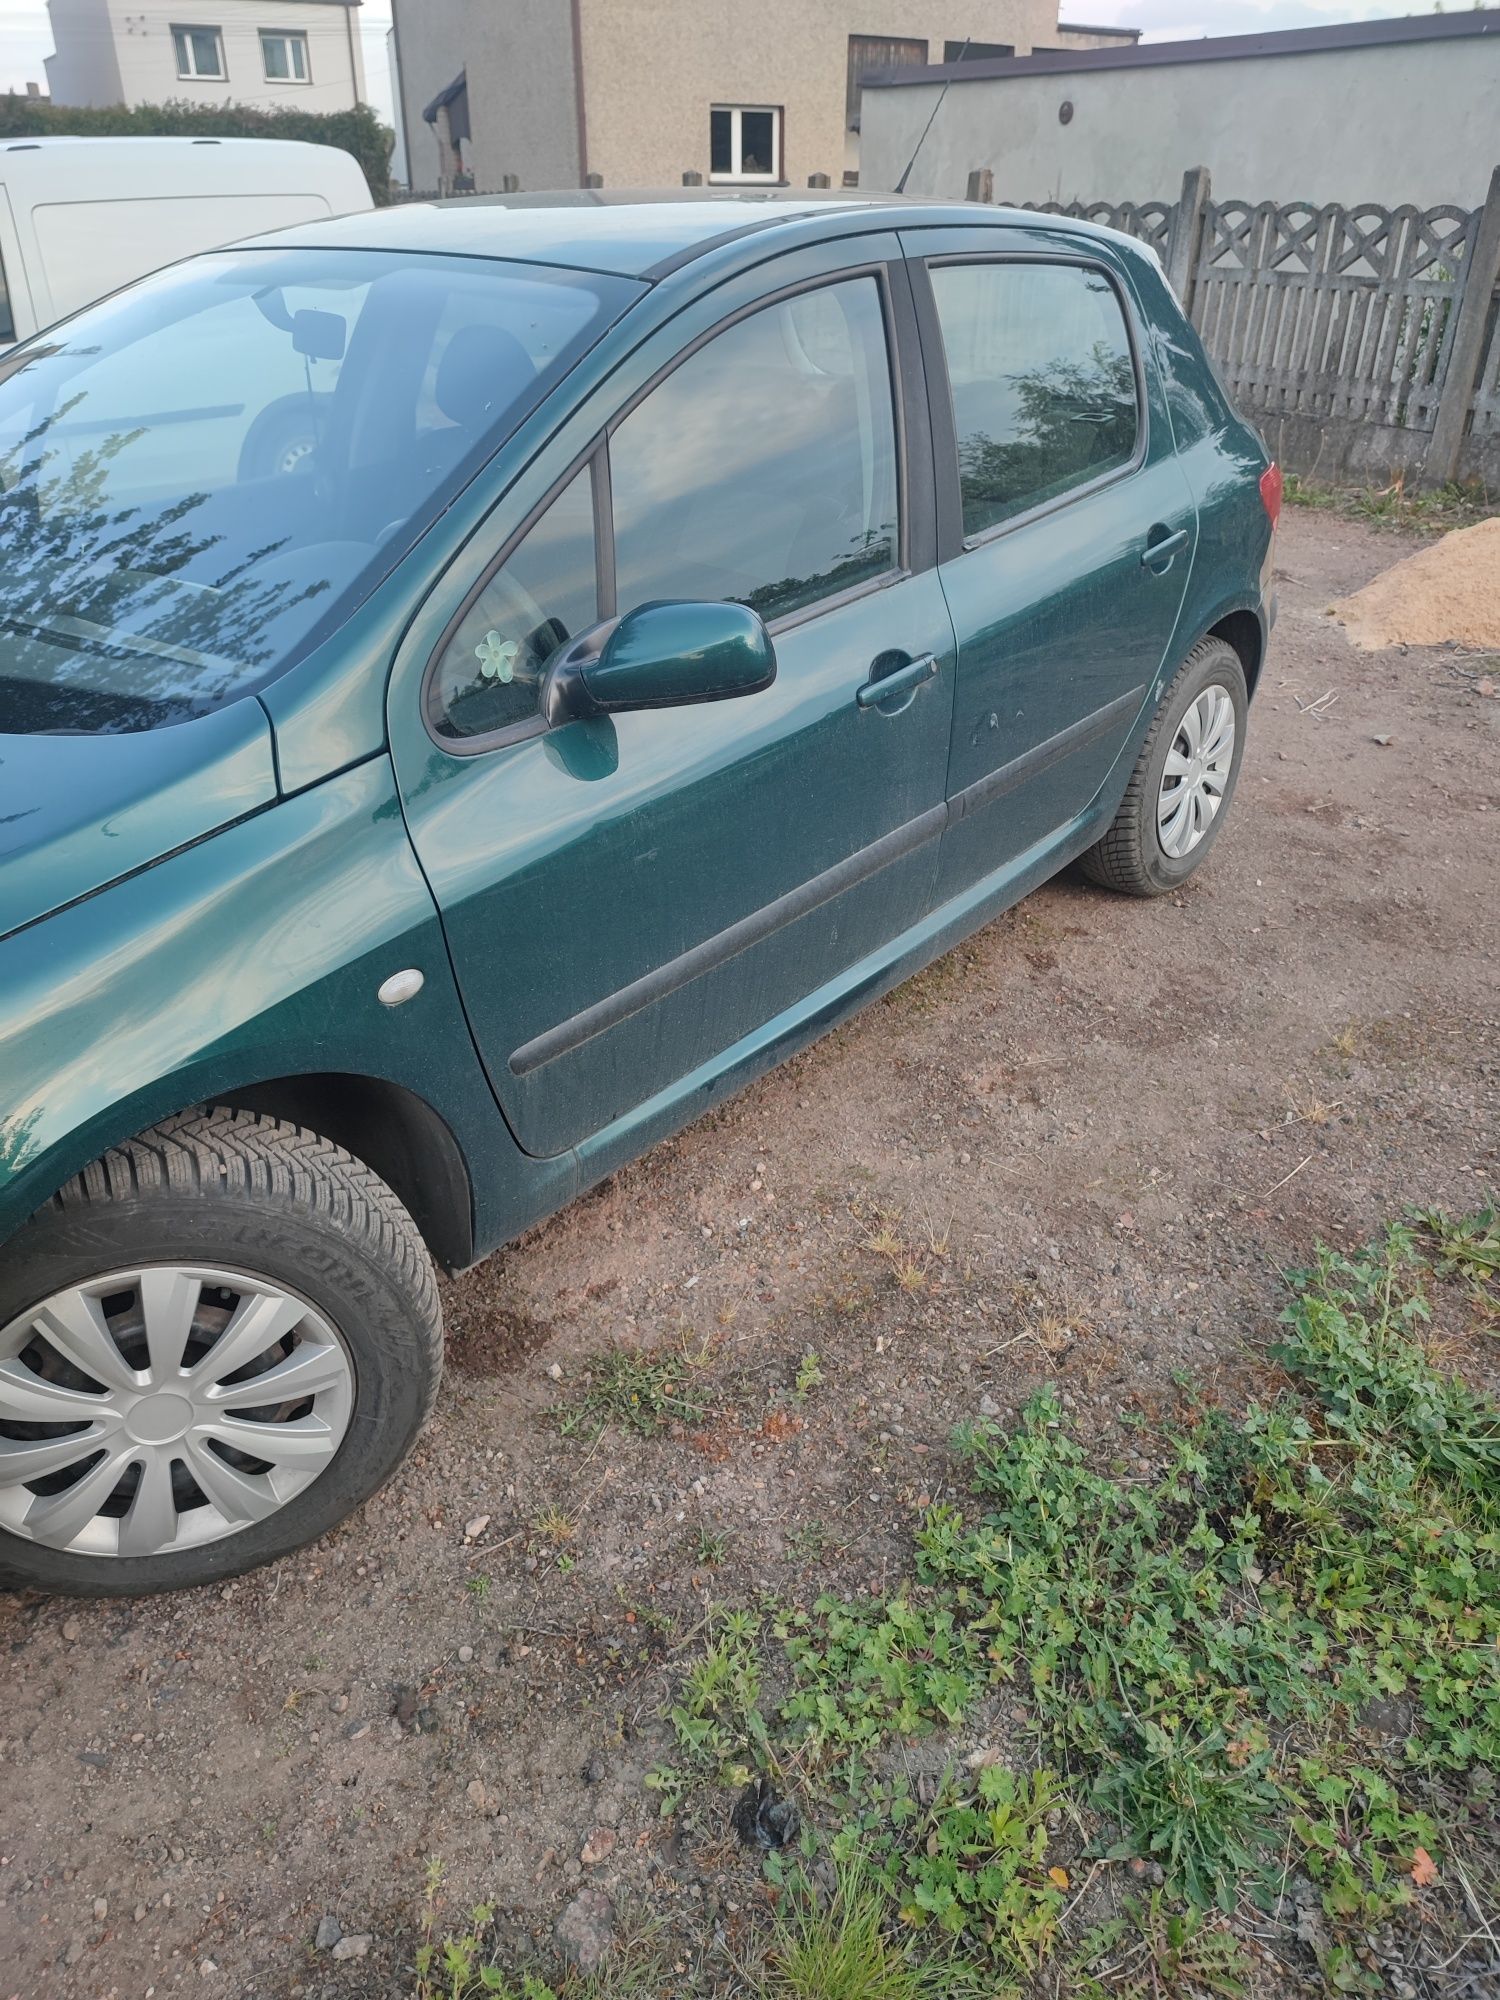 Peugeot 307 1.6 Benzyna